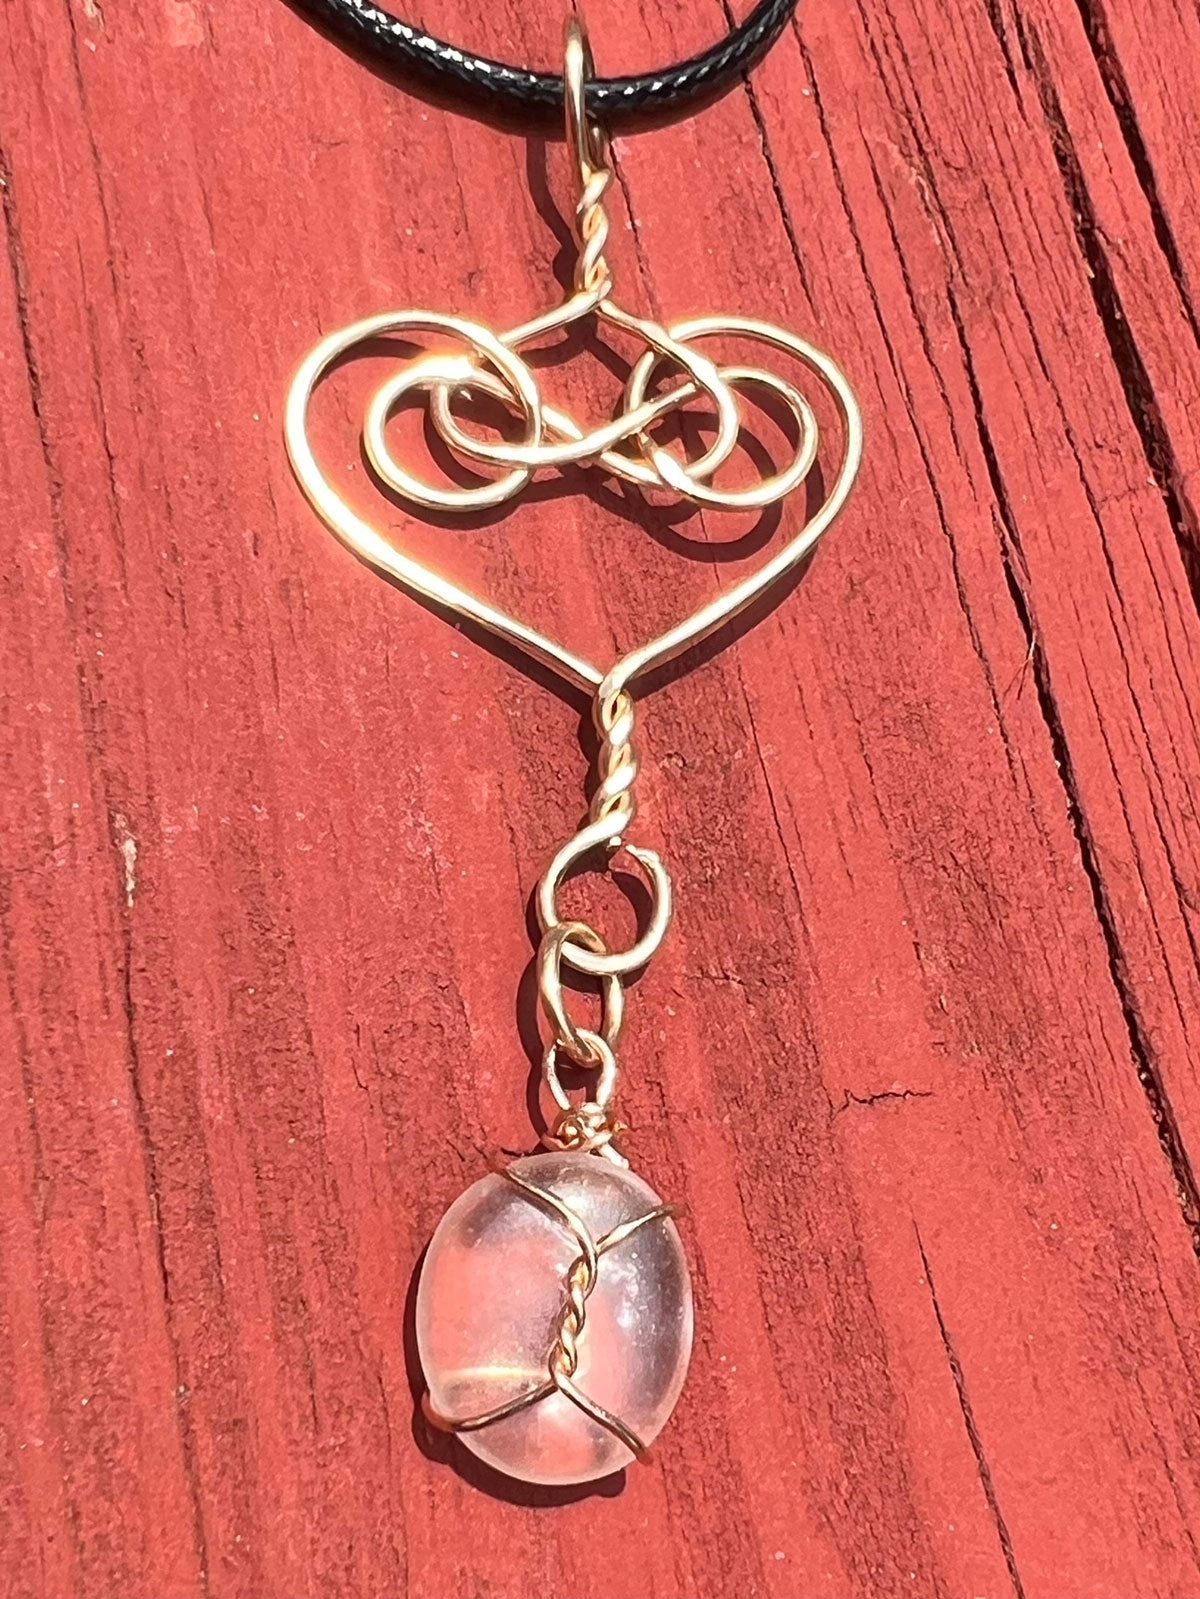 Love, Cape May - High Polished Cape May Diamond Necklace